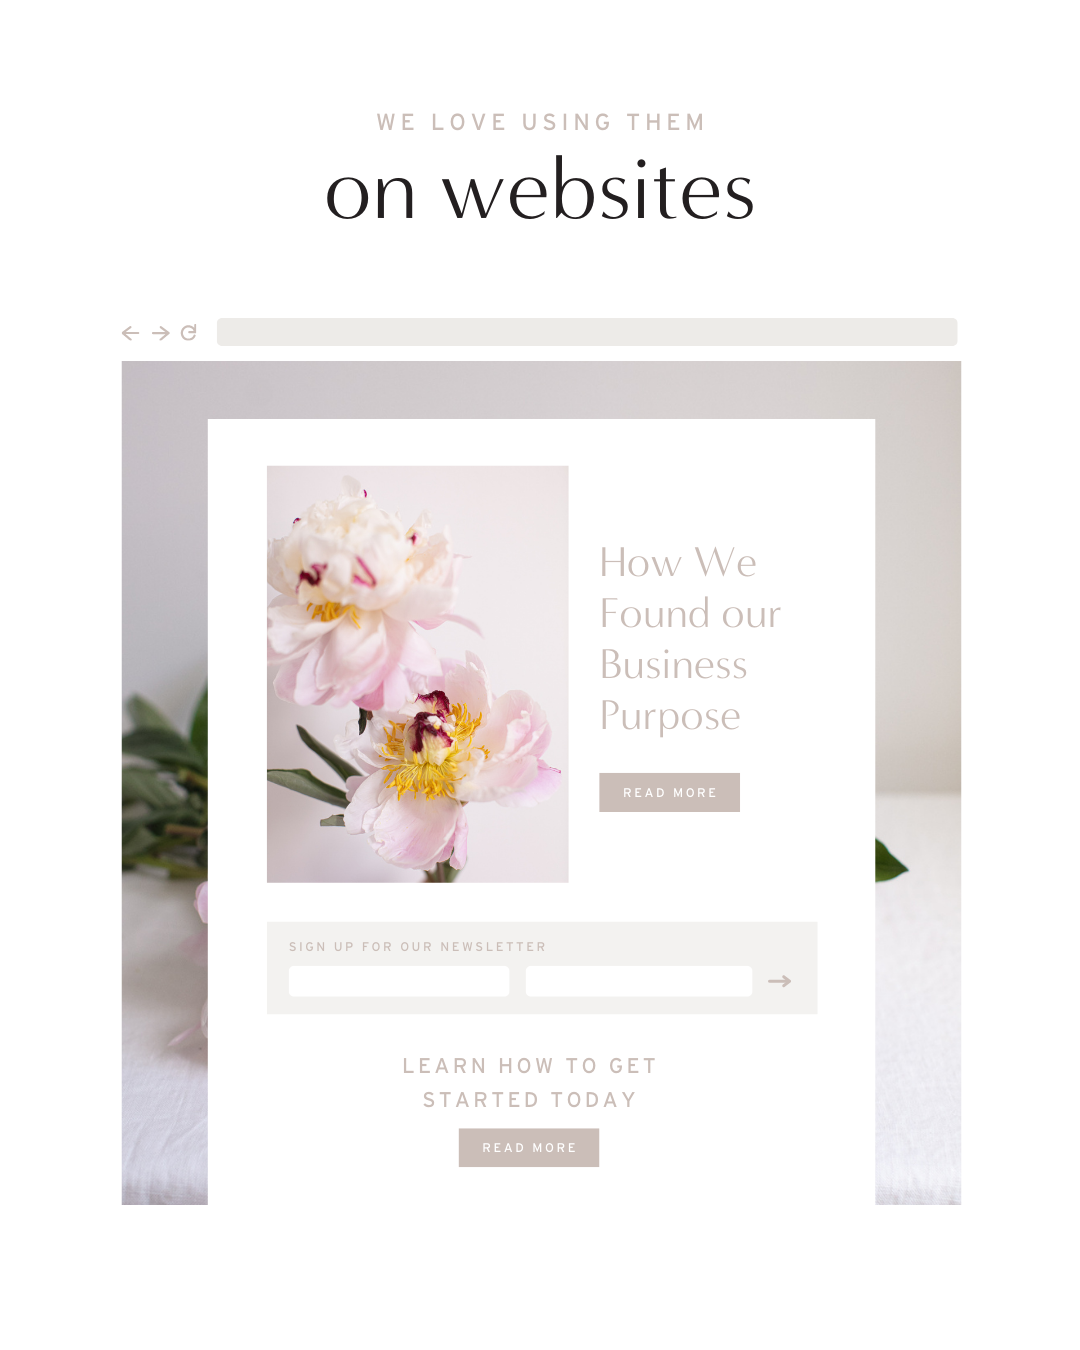 A graphic showing how to use our stock photos on your website. The photo we used is a close up of pink peony flowers.